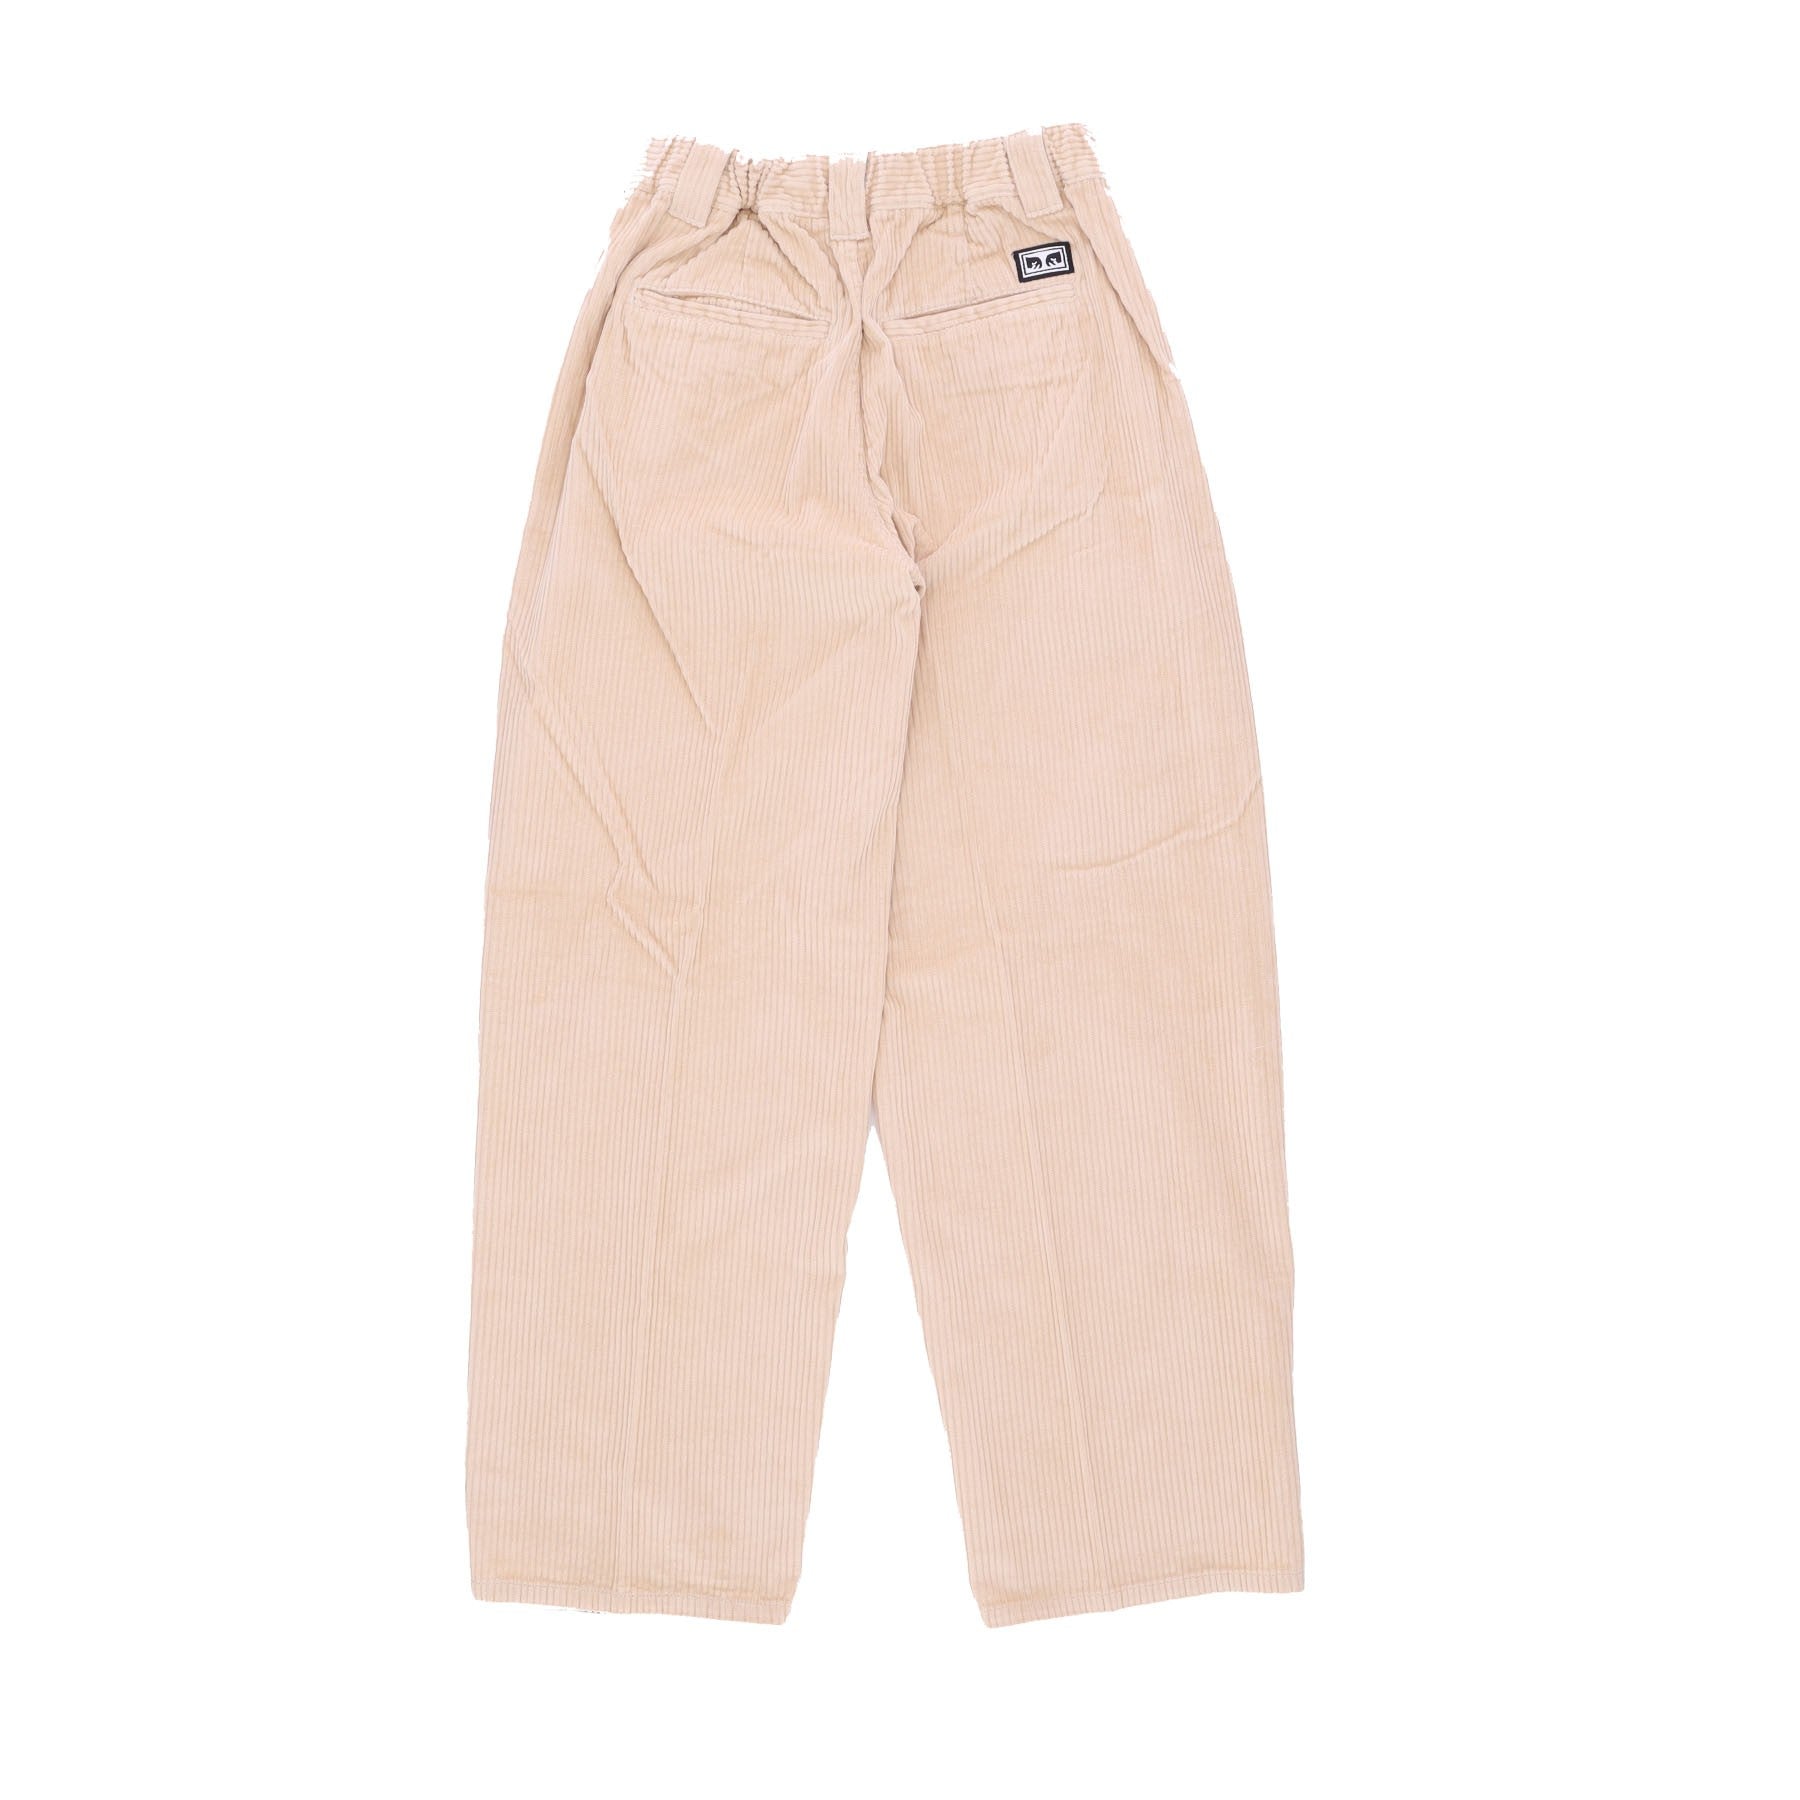 Obey, Pantalone Lungo Donna Luna Baggy Cord Pant, 